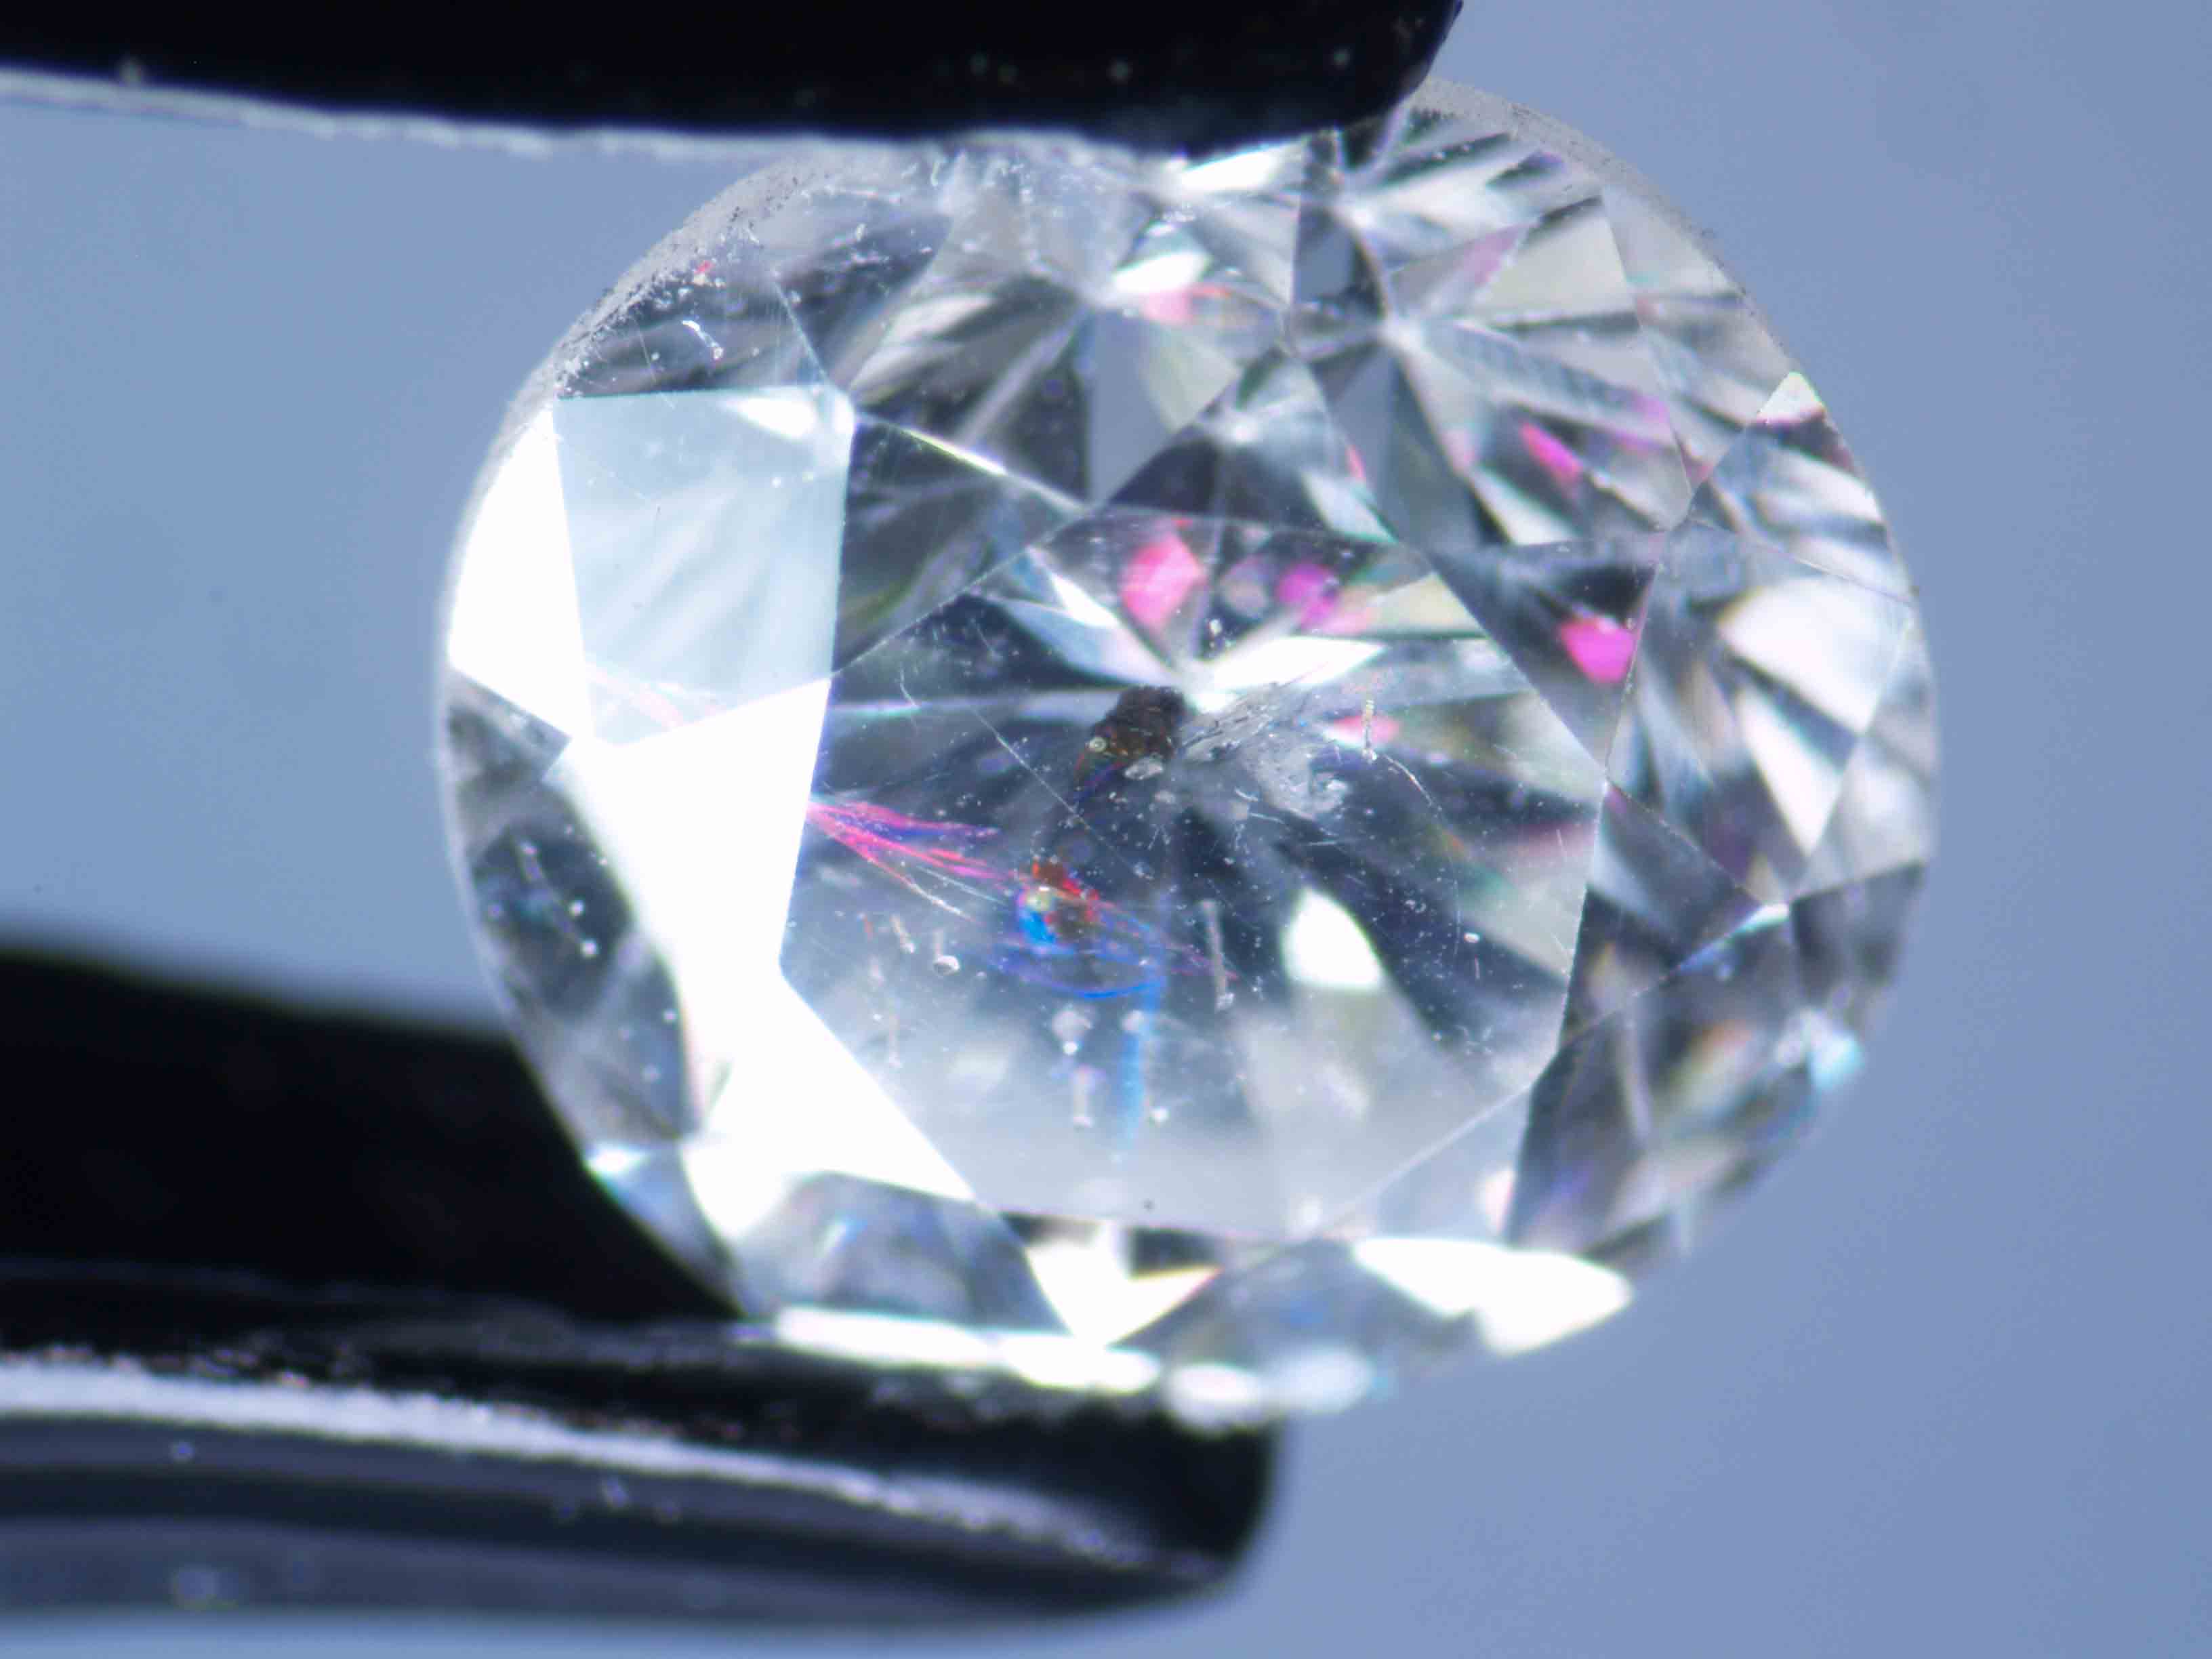 Beginner’s Guide: Interesting Inclusions in Diamonds - - Diamond Treated Fracture FilledLaser Dilled Colour FlashesEntry Holes 0272 GemA